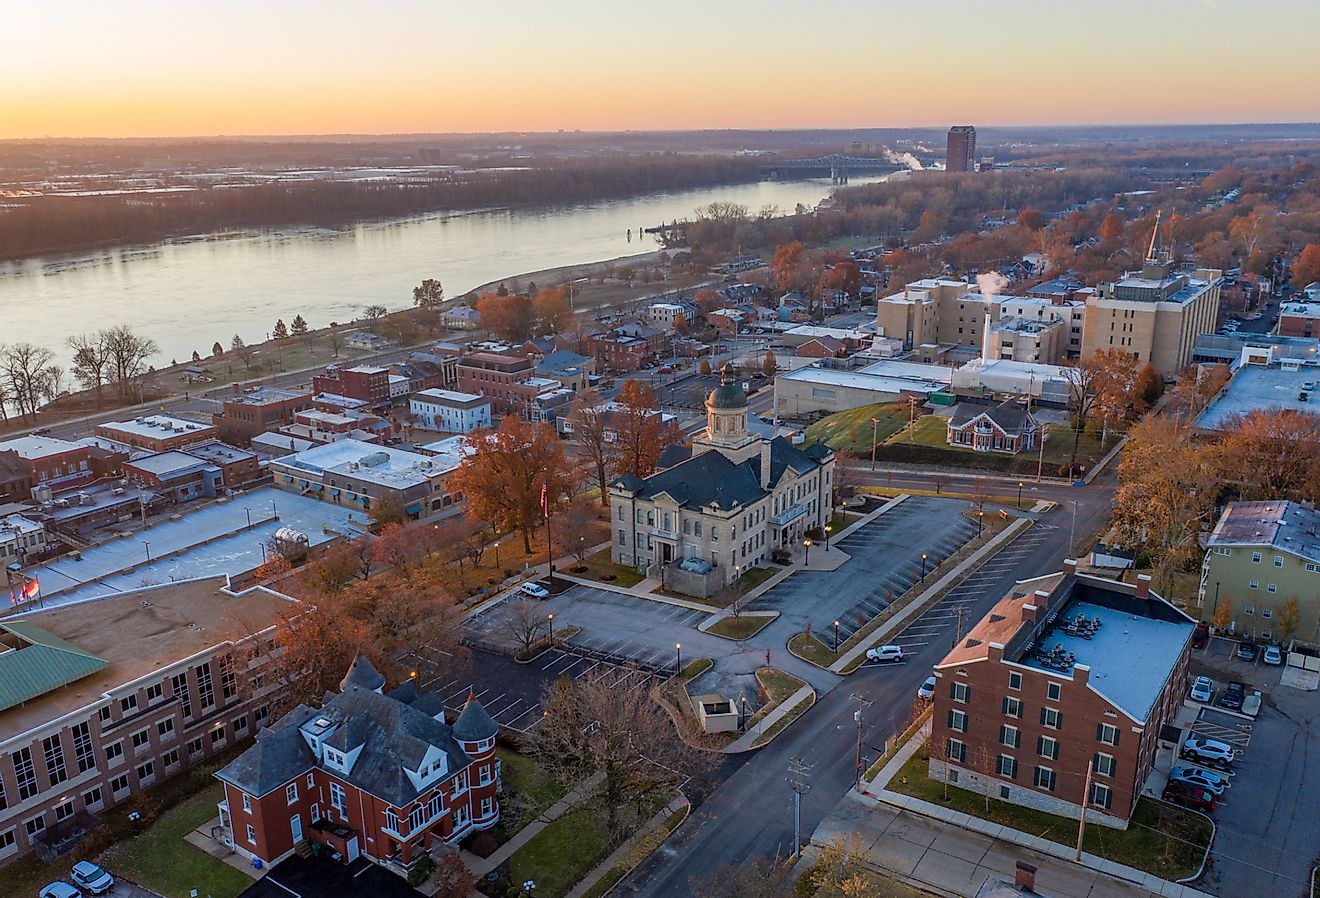 Historic downtown St Charles. Image credit RN Photo Midwest via Shutterstock